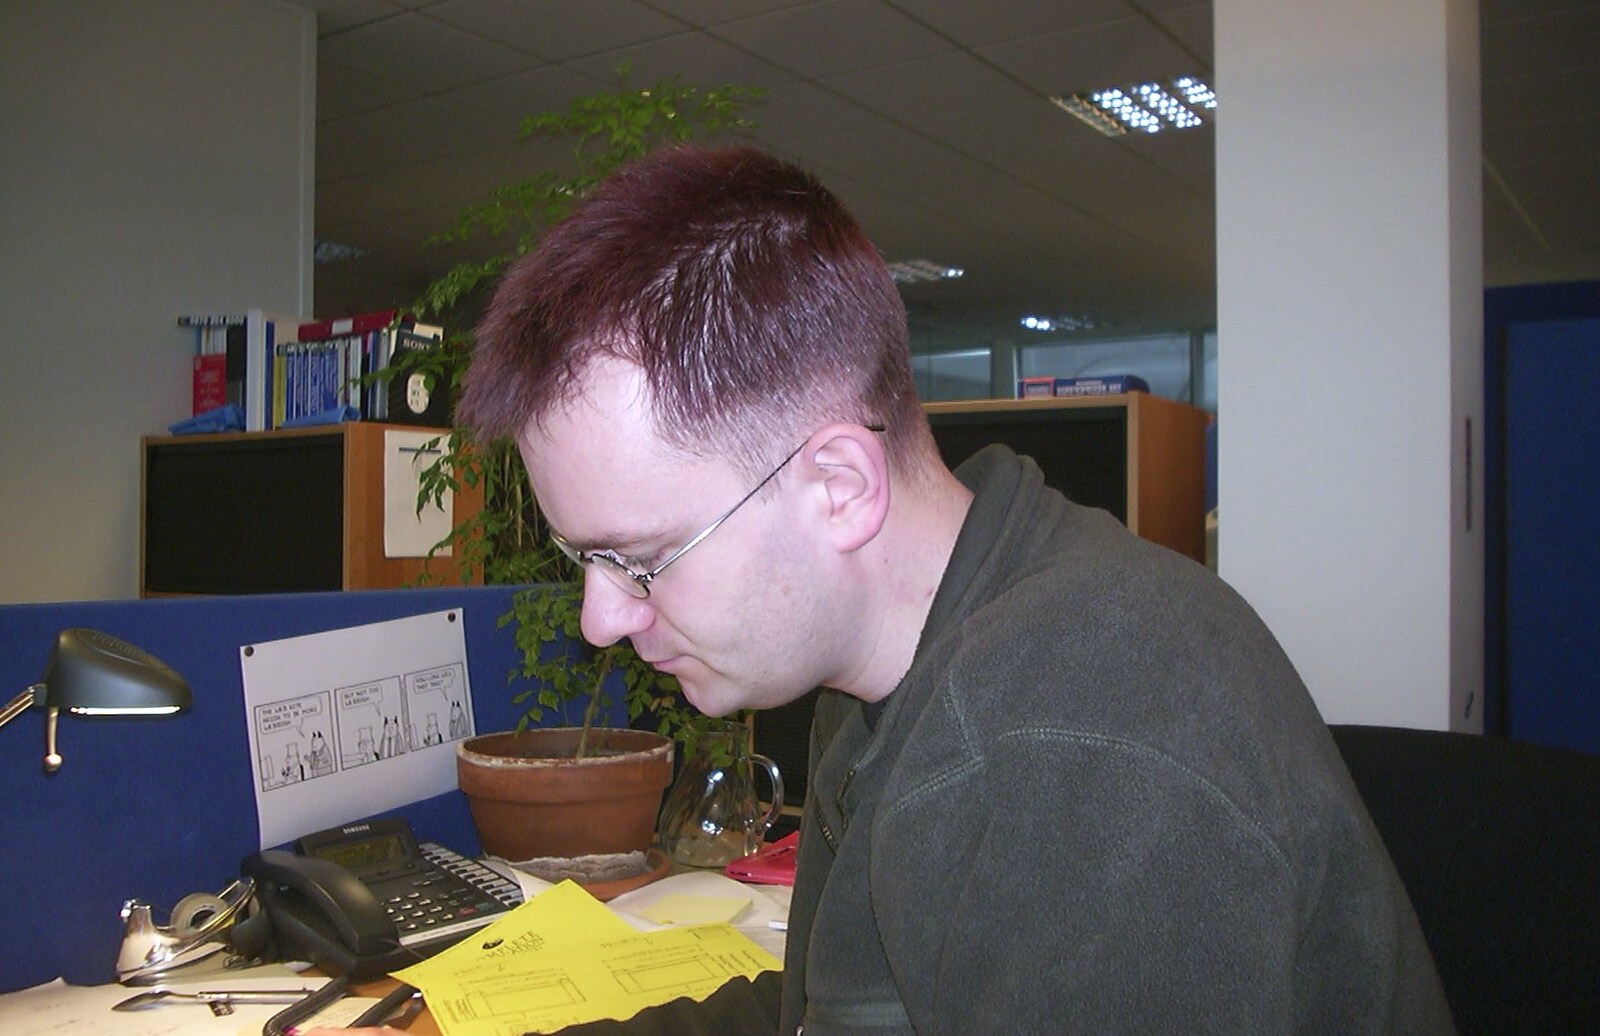 Nosher's new purple hair from Longview, Easyworld and Peterborough Cathedral, Cambridgeshire - 10th February 2003